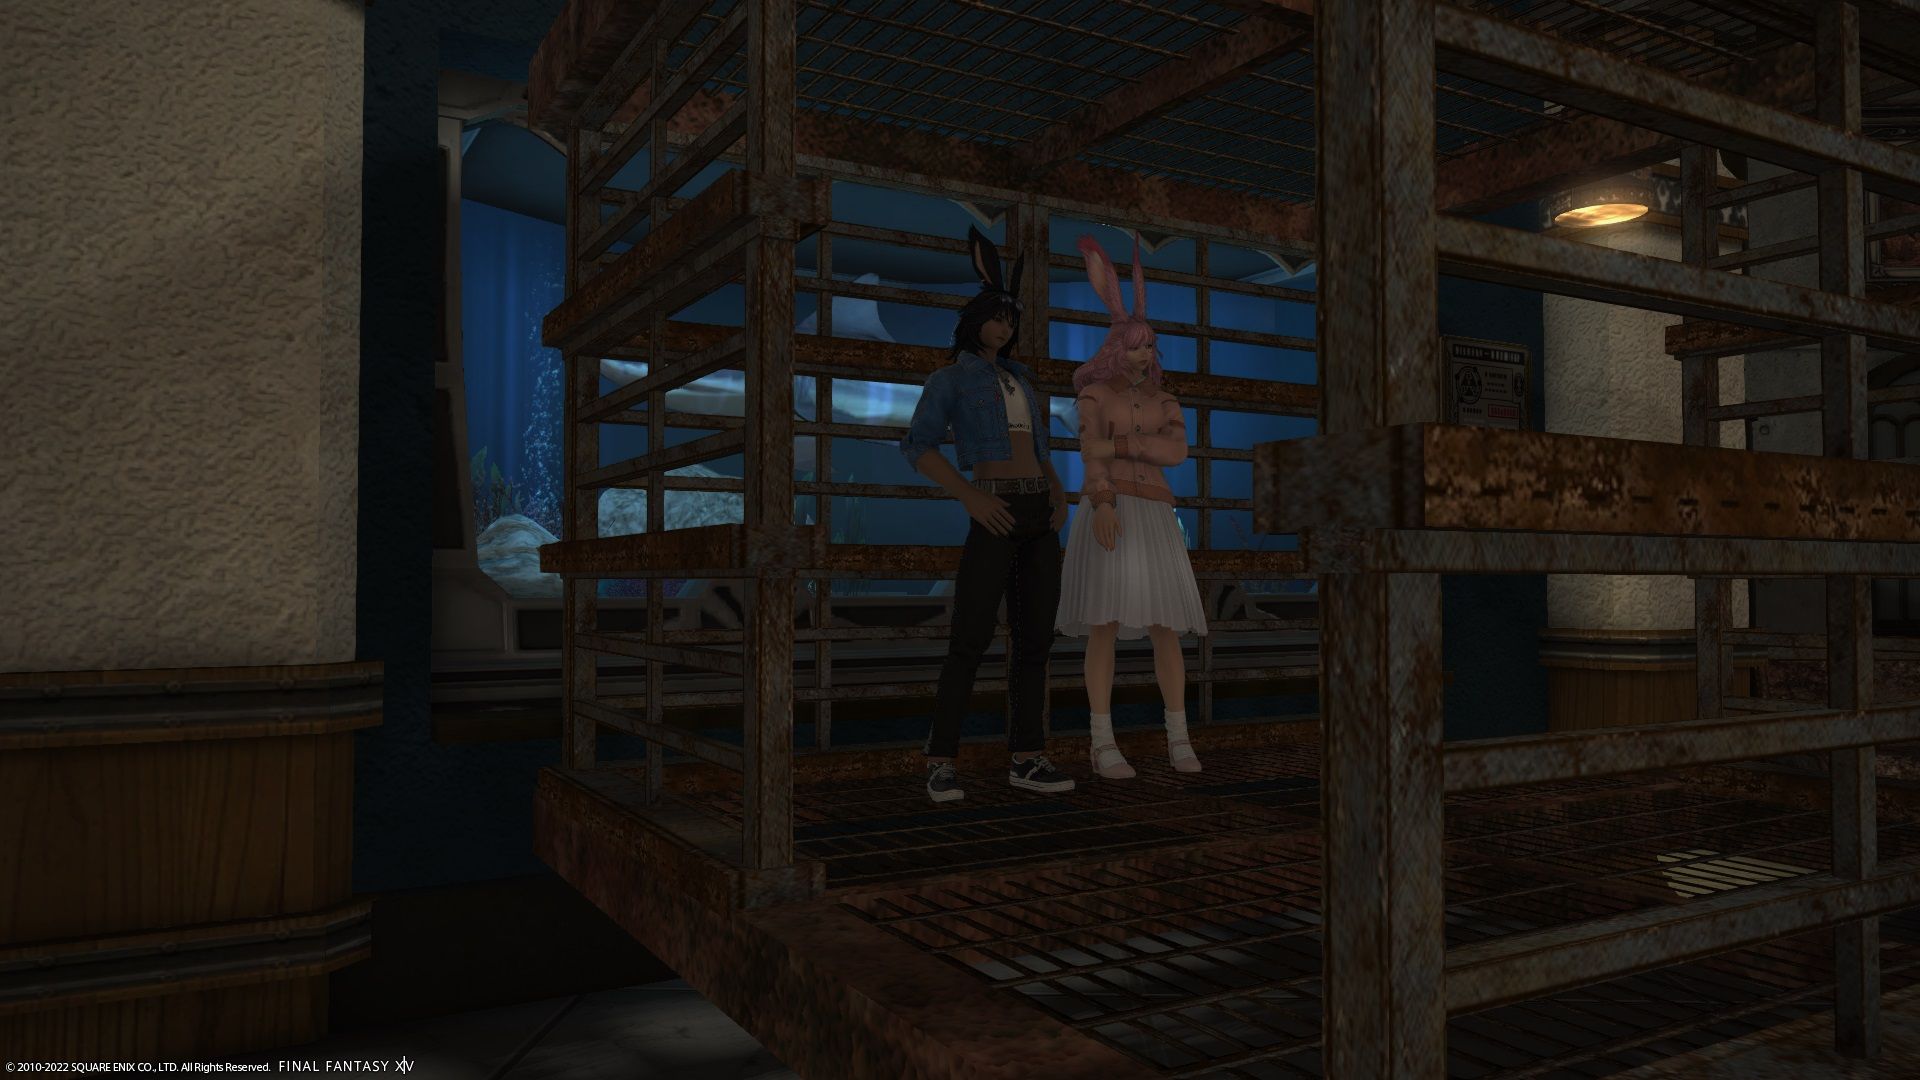 FF14 Eorzean Aquarium shark encounter with players standing in a shark cage